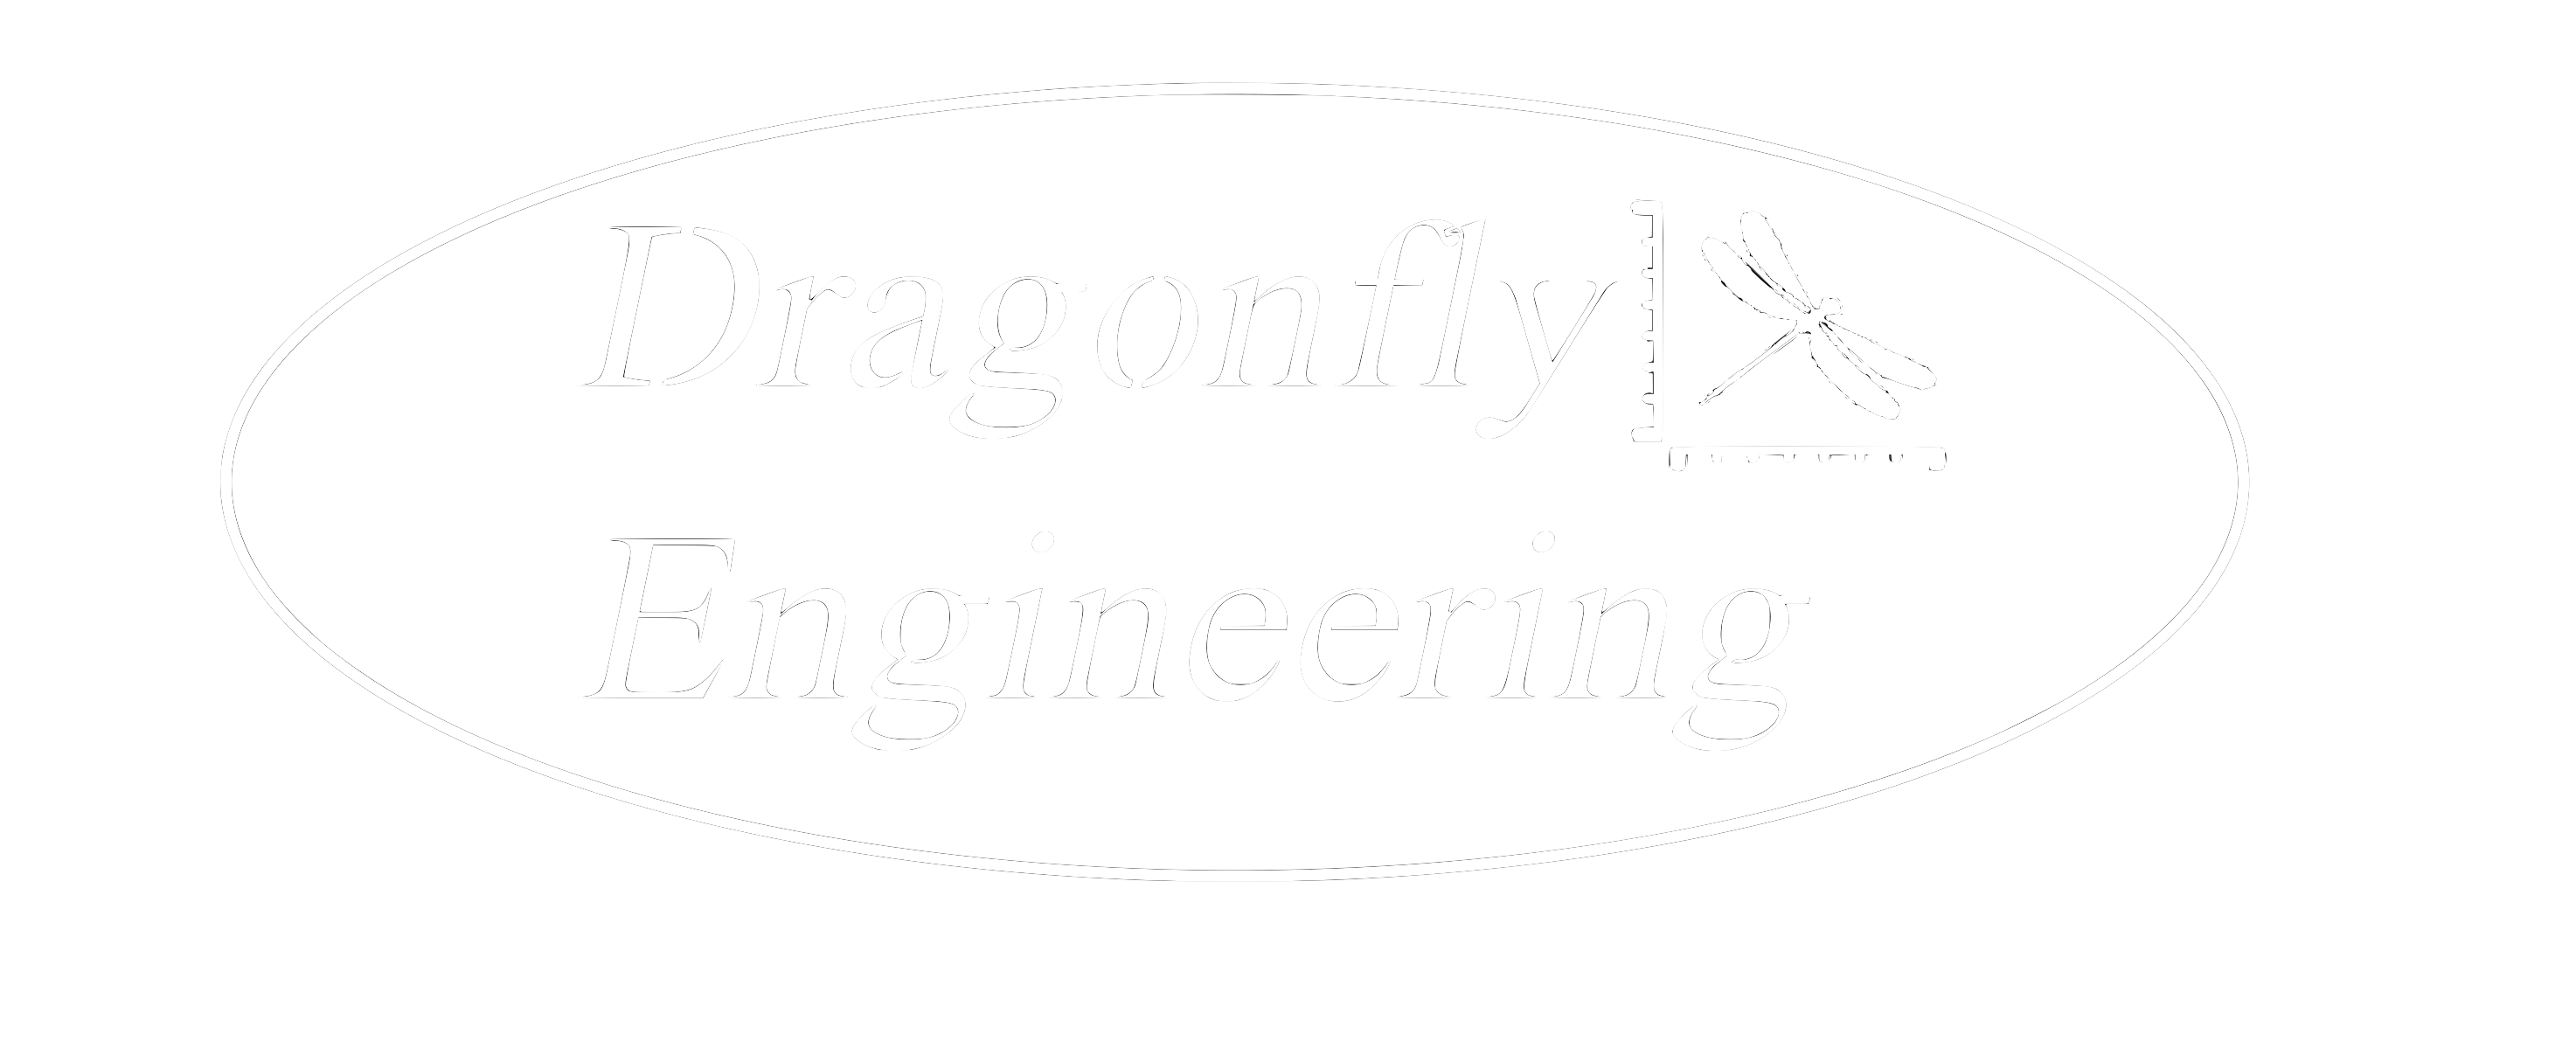 Dragonfly Engineering